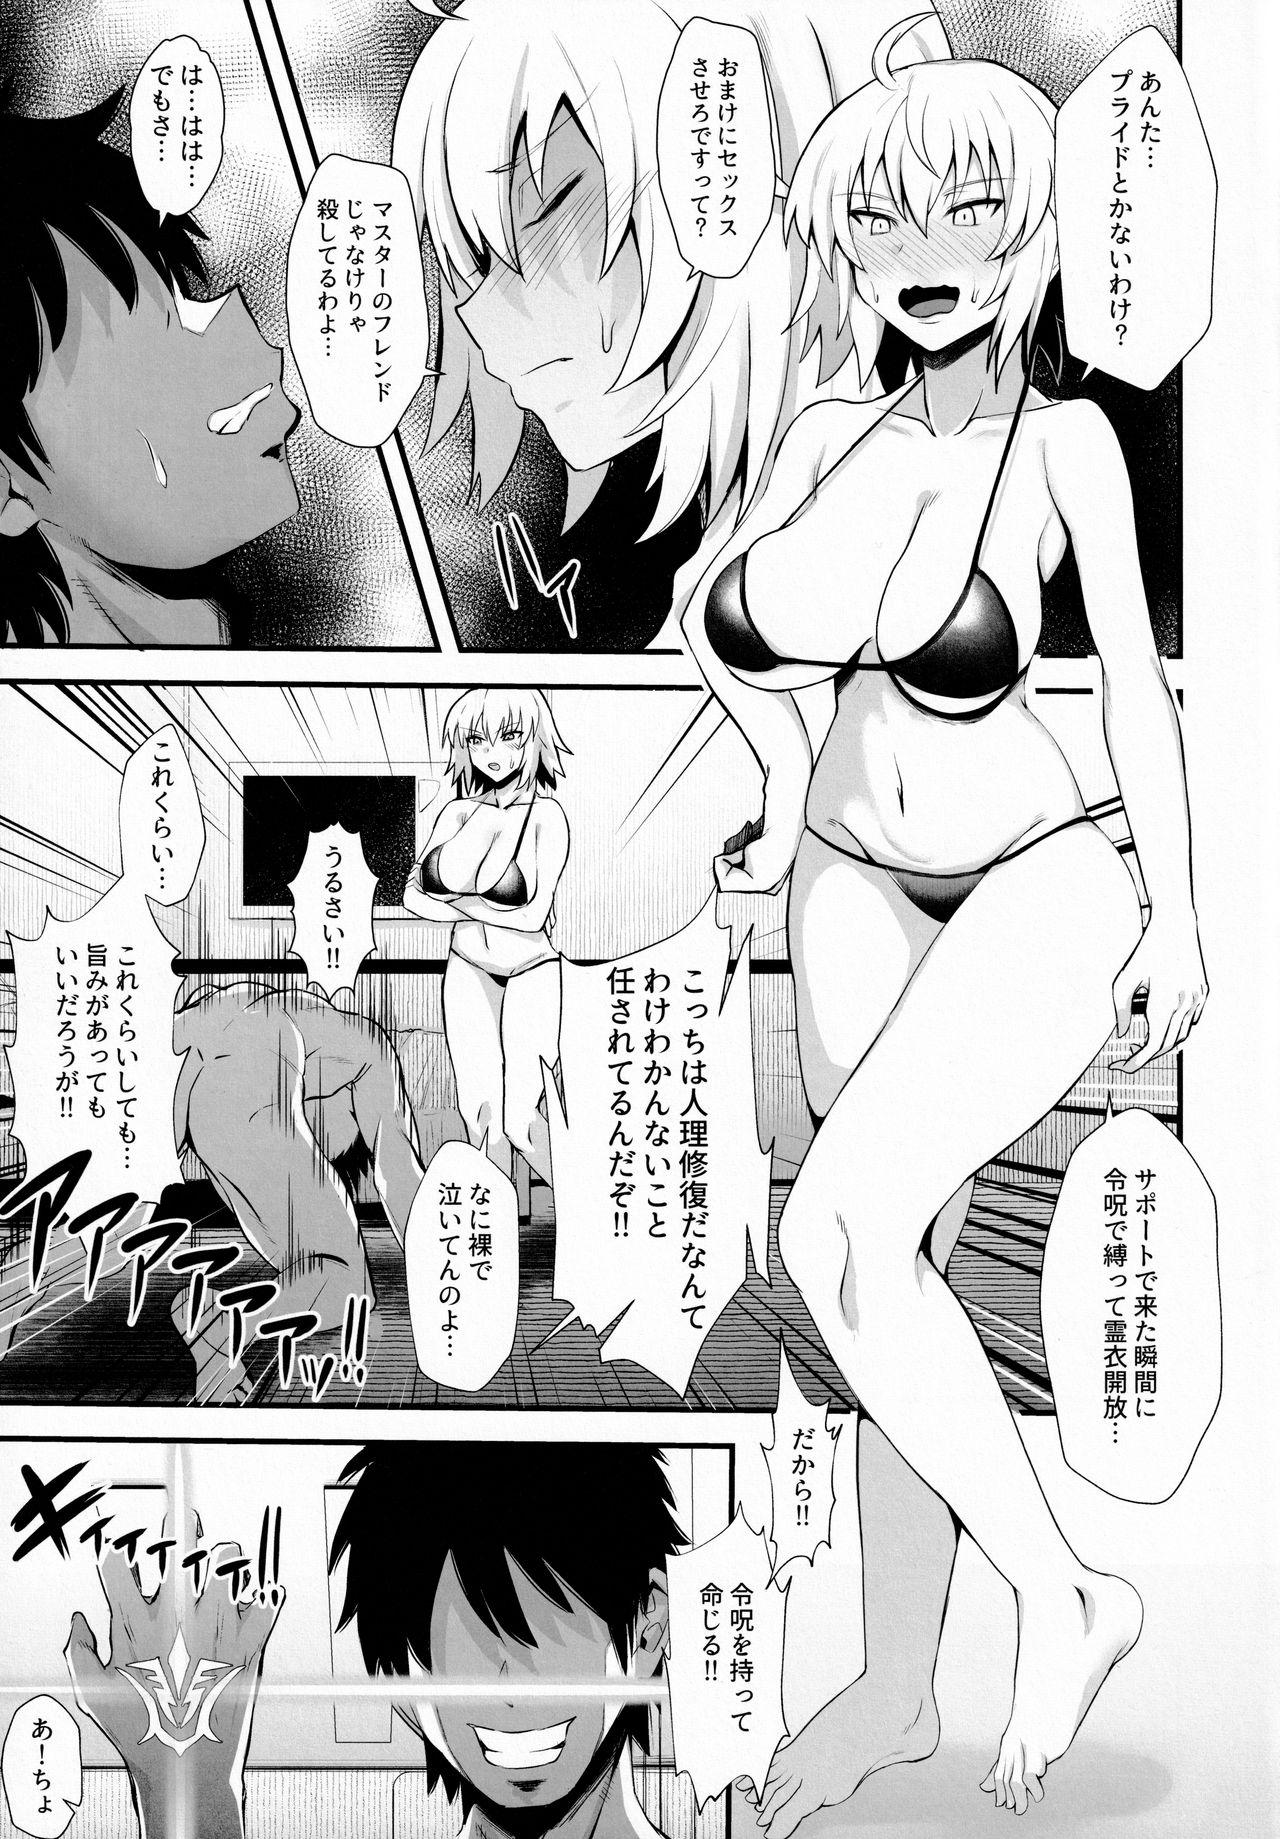 Slapping Support Order - Fate grand order Speculum - Page 3